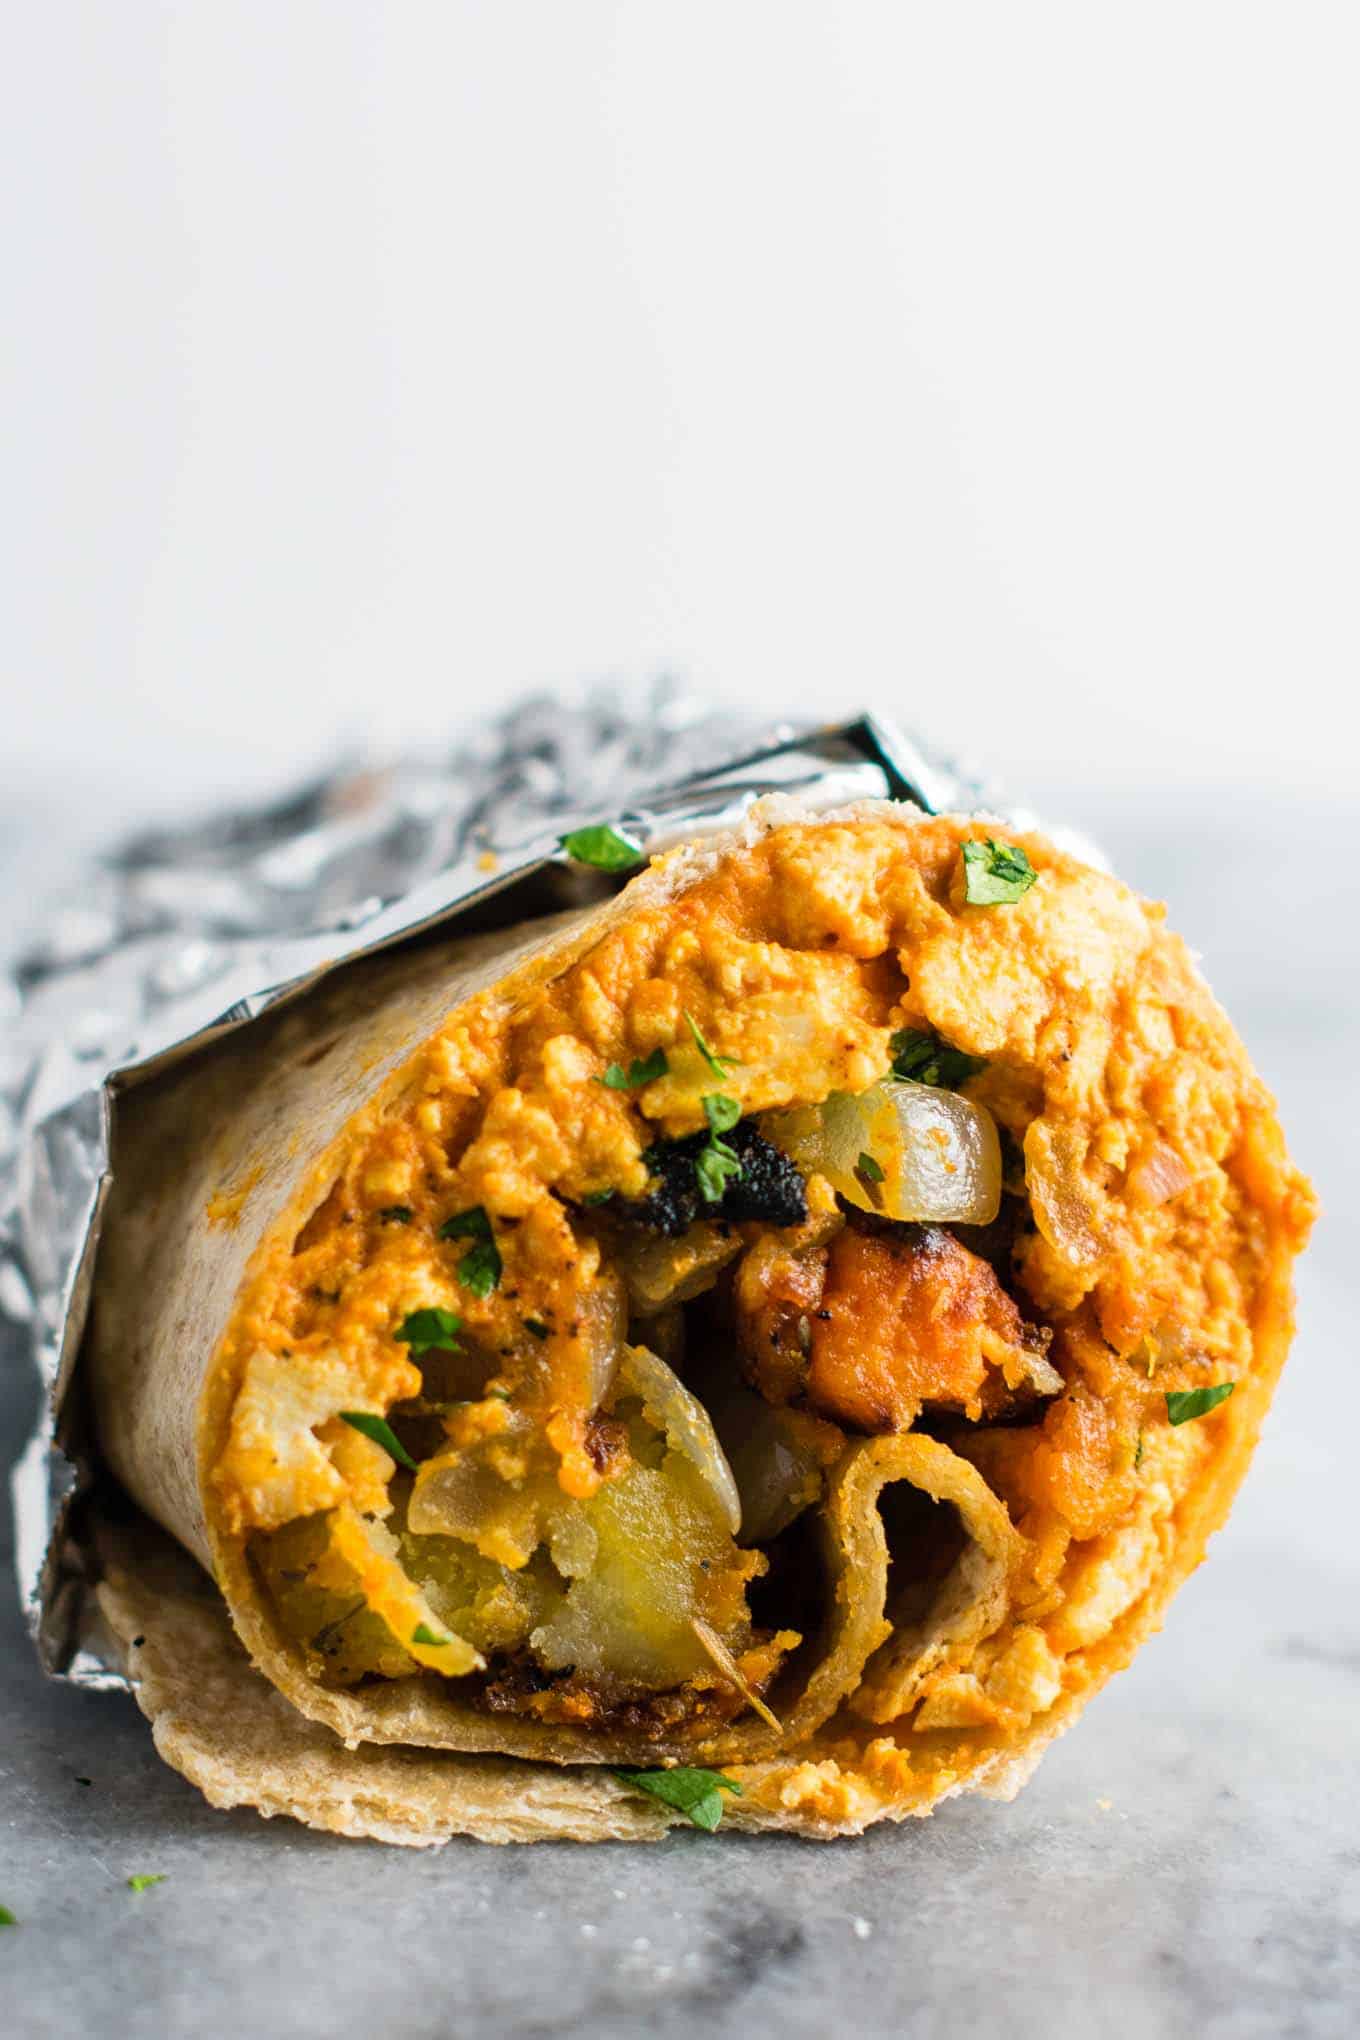 best vegan recipes - The BEST vegan breakfast burrito recipe with simple vegan breakfast hash you’ll ever try! Made with scrambled tofu and crispy vegan breakfast hash. #veganbreakfastburrito #veganbreakfast #vegan #breakfastburrito